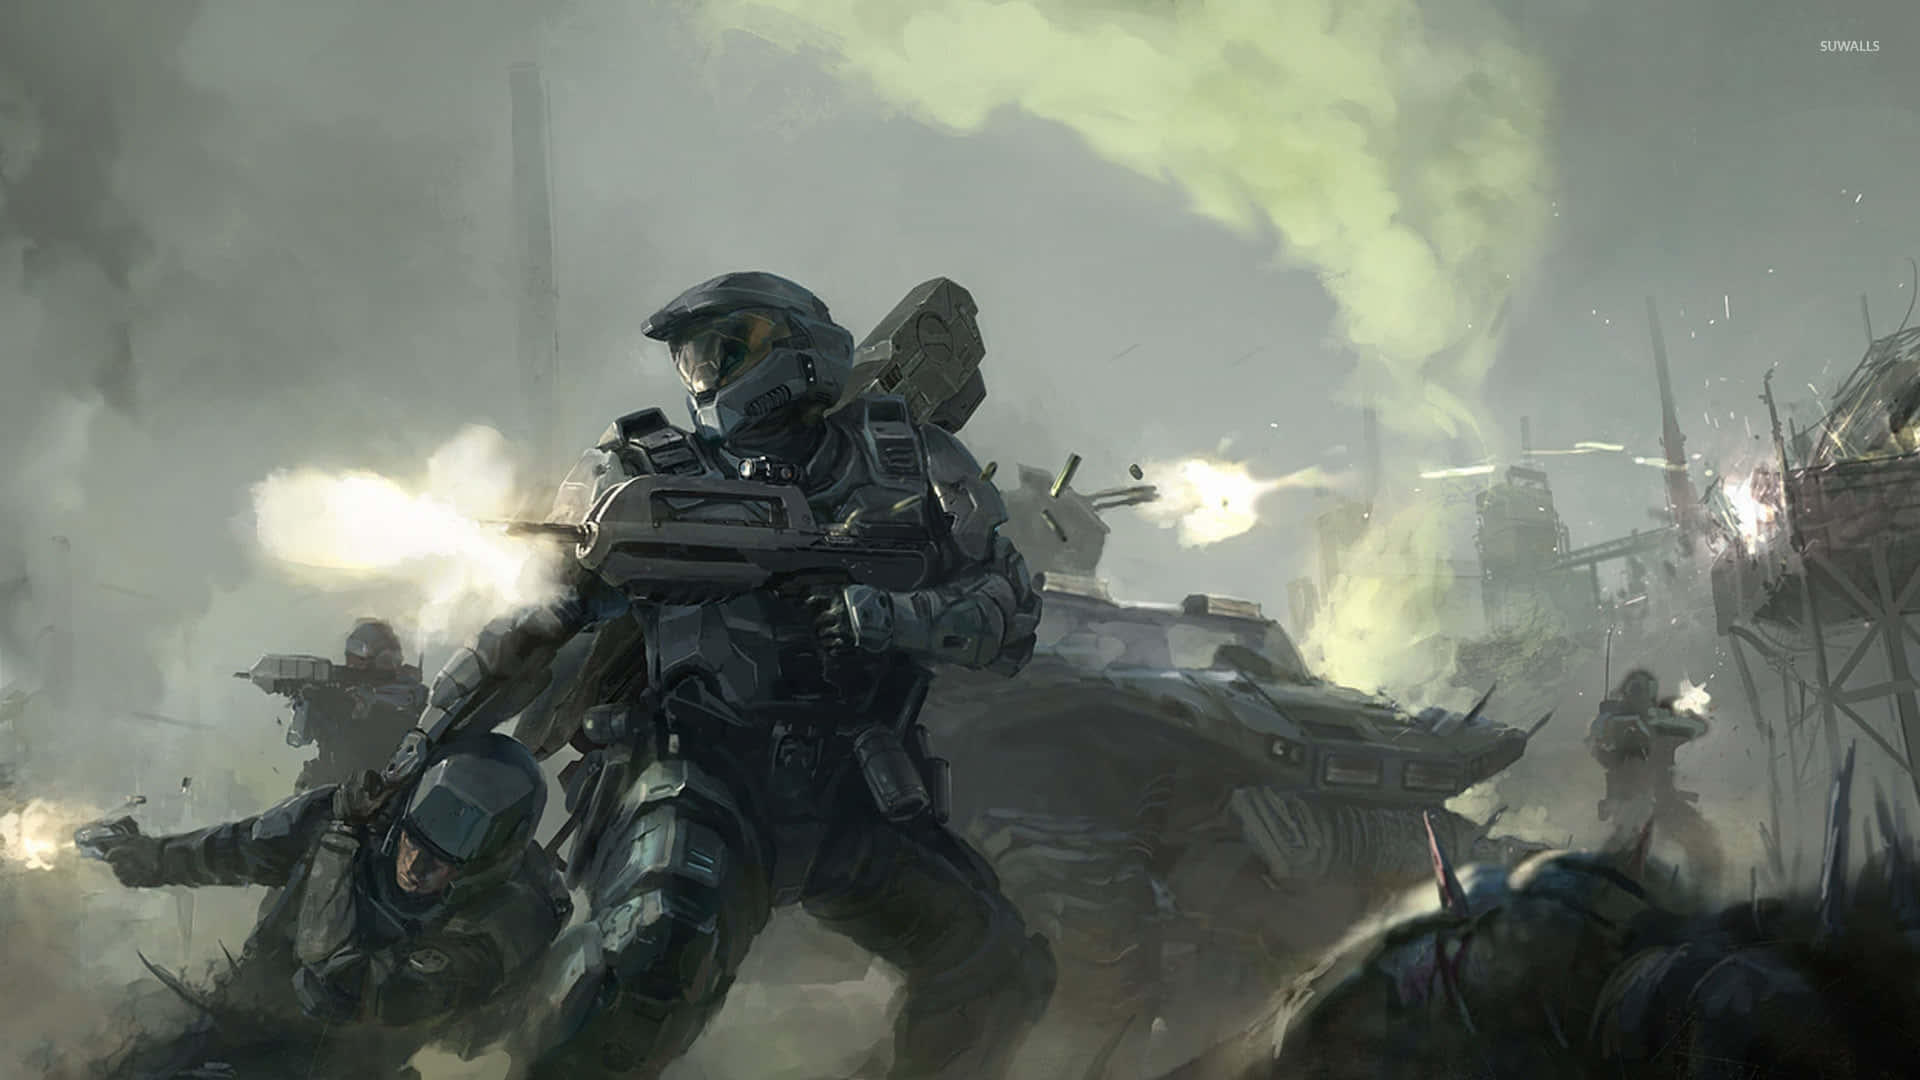 Cool Halo Soldiers And Tanks Wallpaper